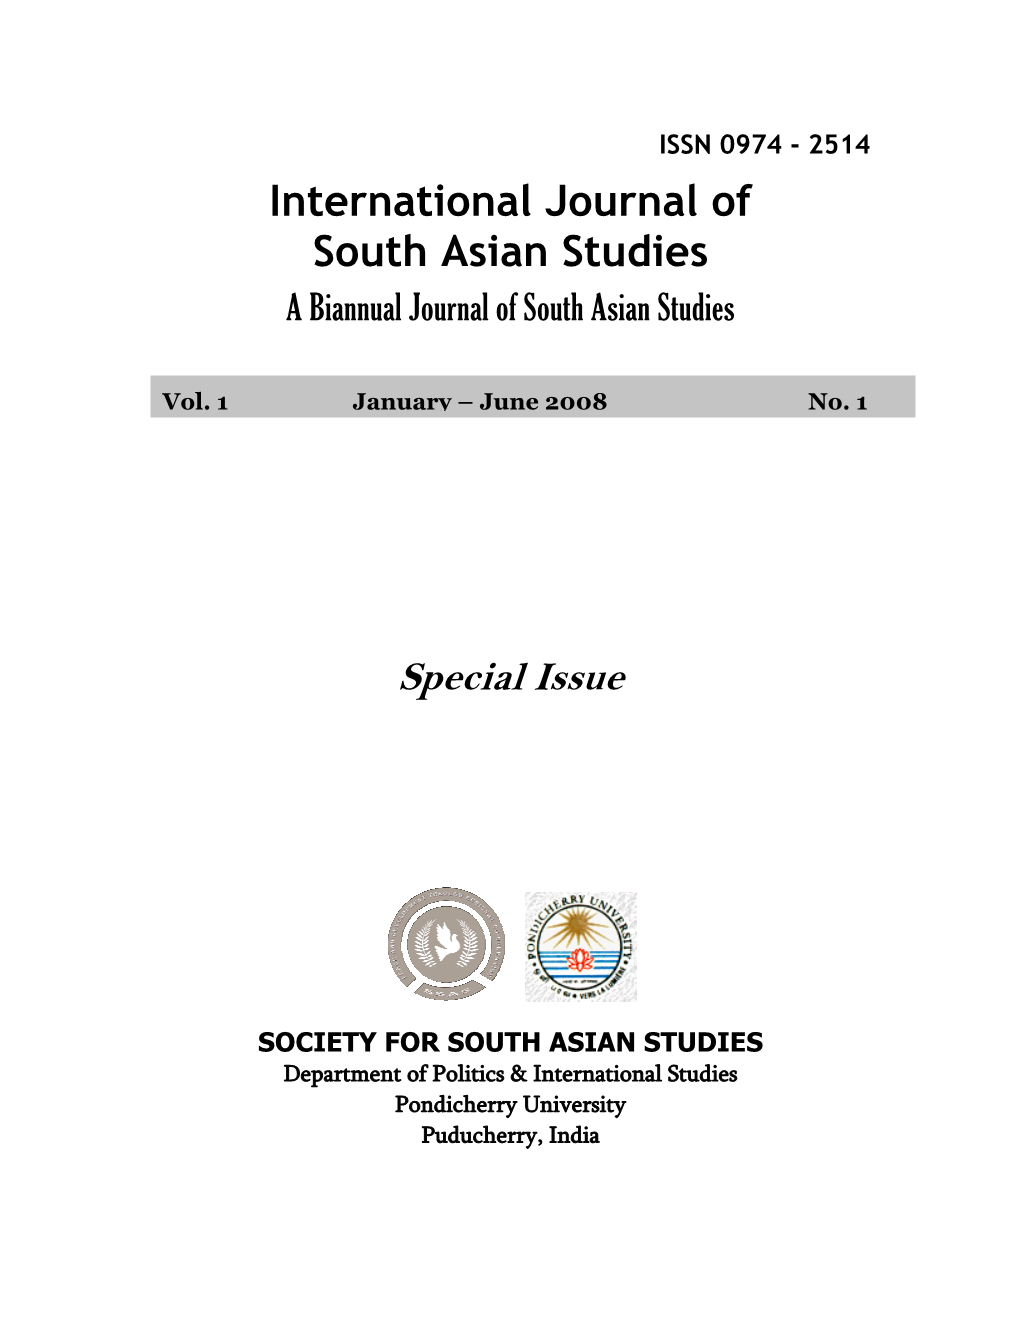 International Journal of South Asian Studies Special Issue